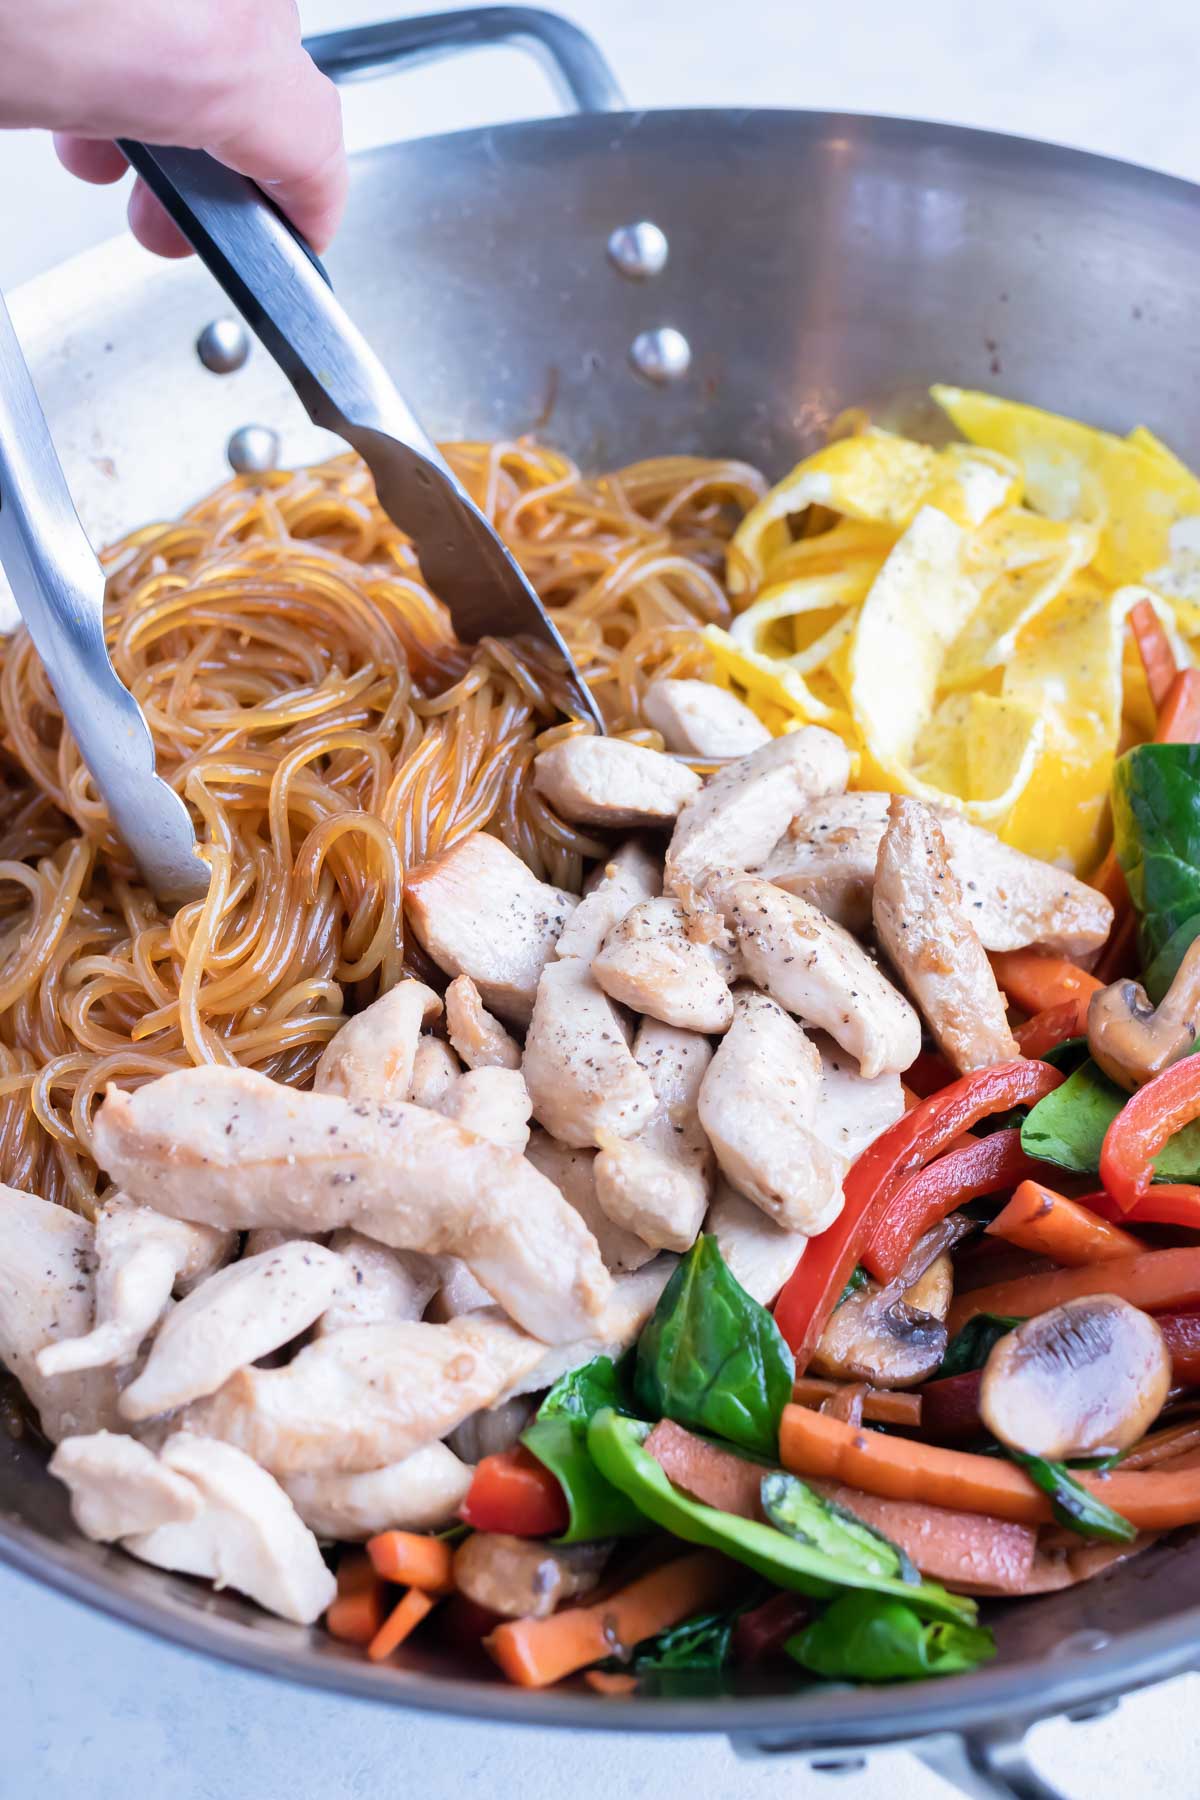 The cooked chicken, eggs, and cooked vegetables are combined with the glass noodles.